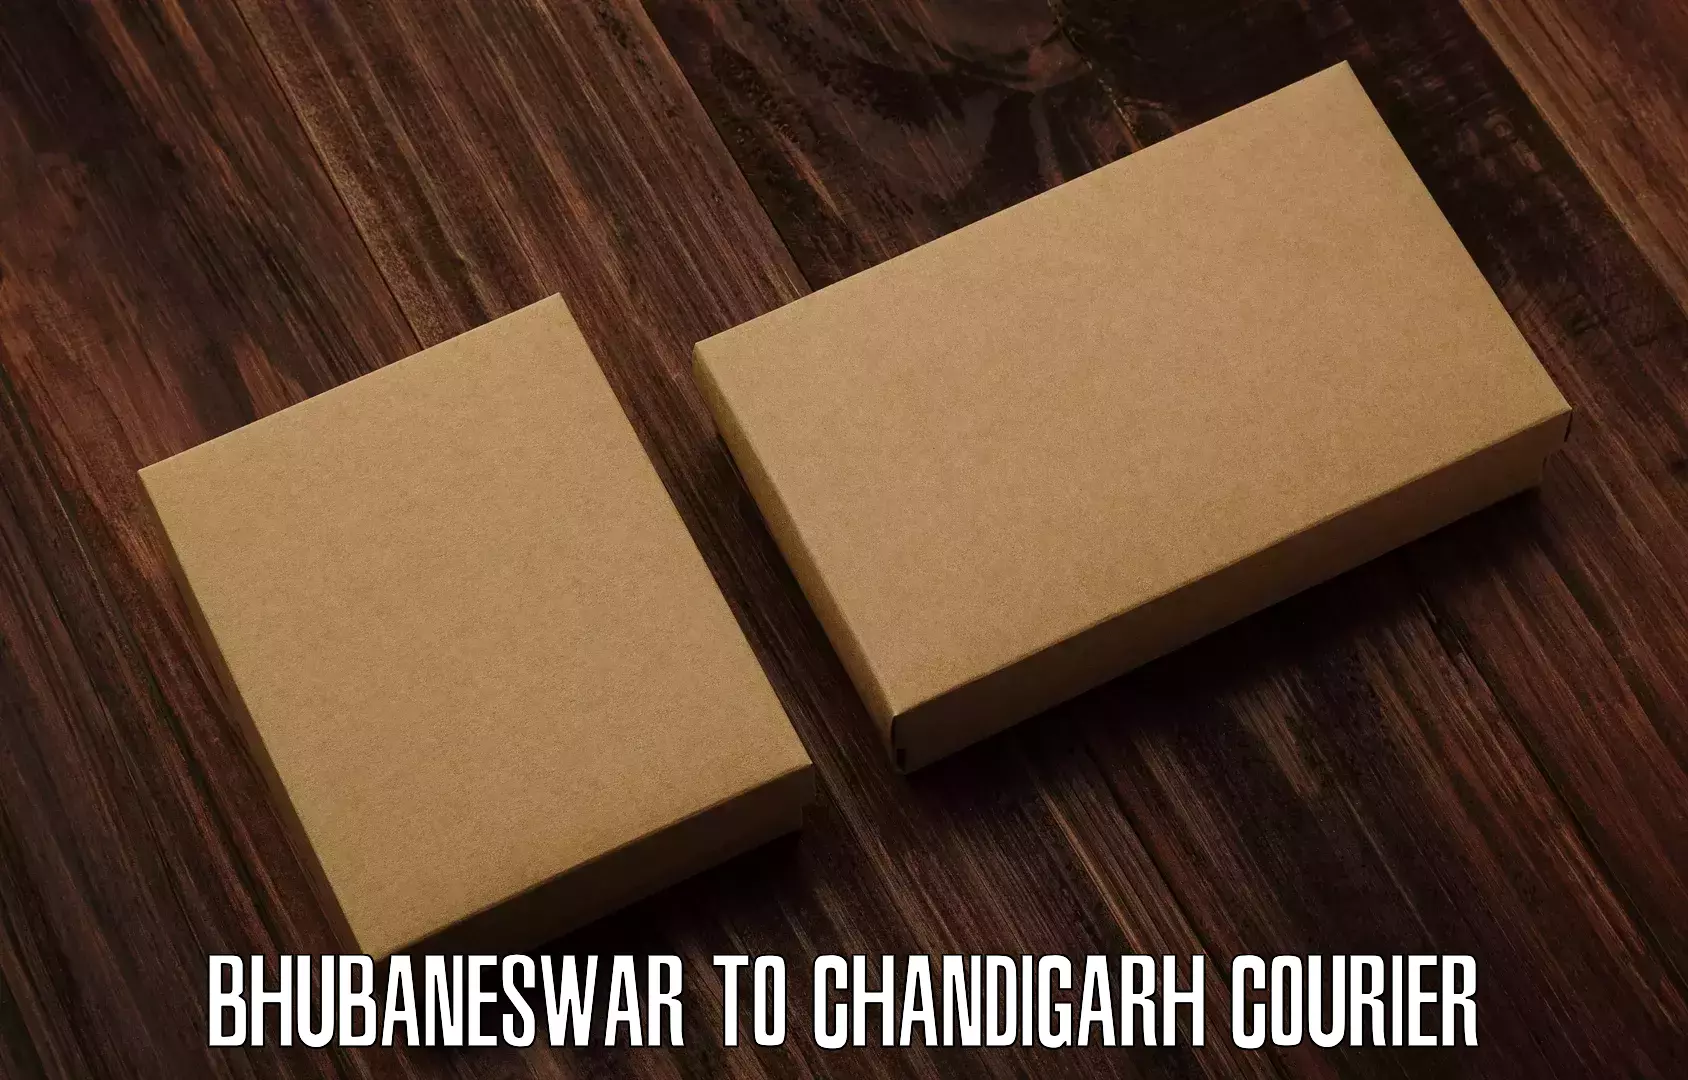 Reliable delivery network Bhubaneswar to Chandigarh